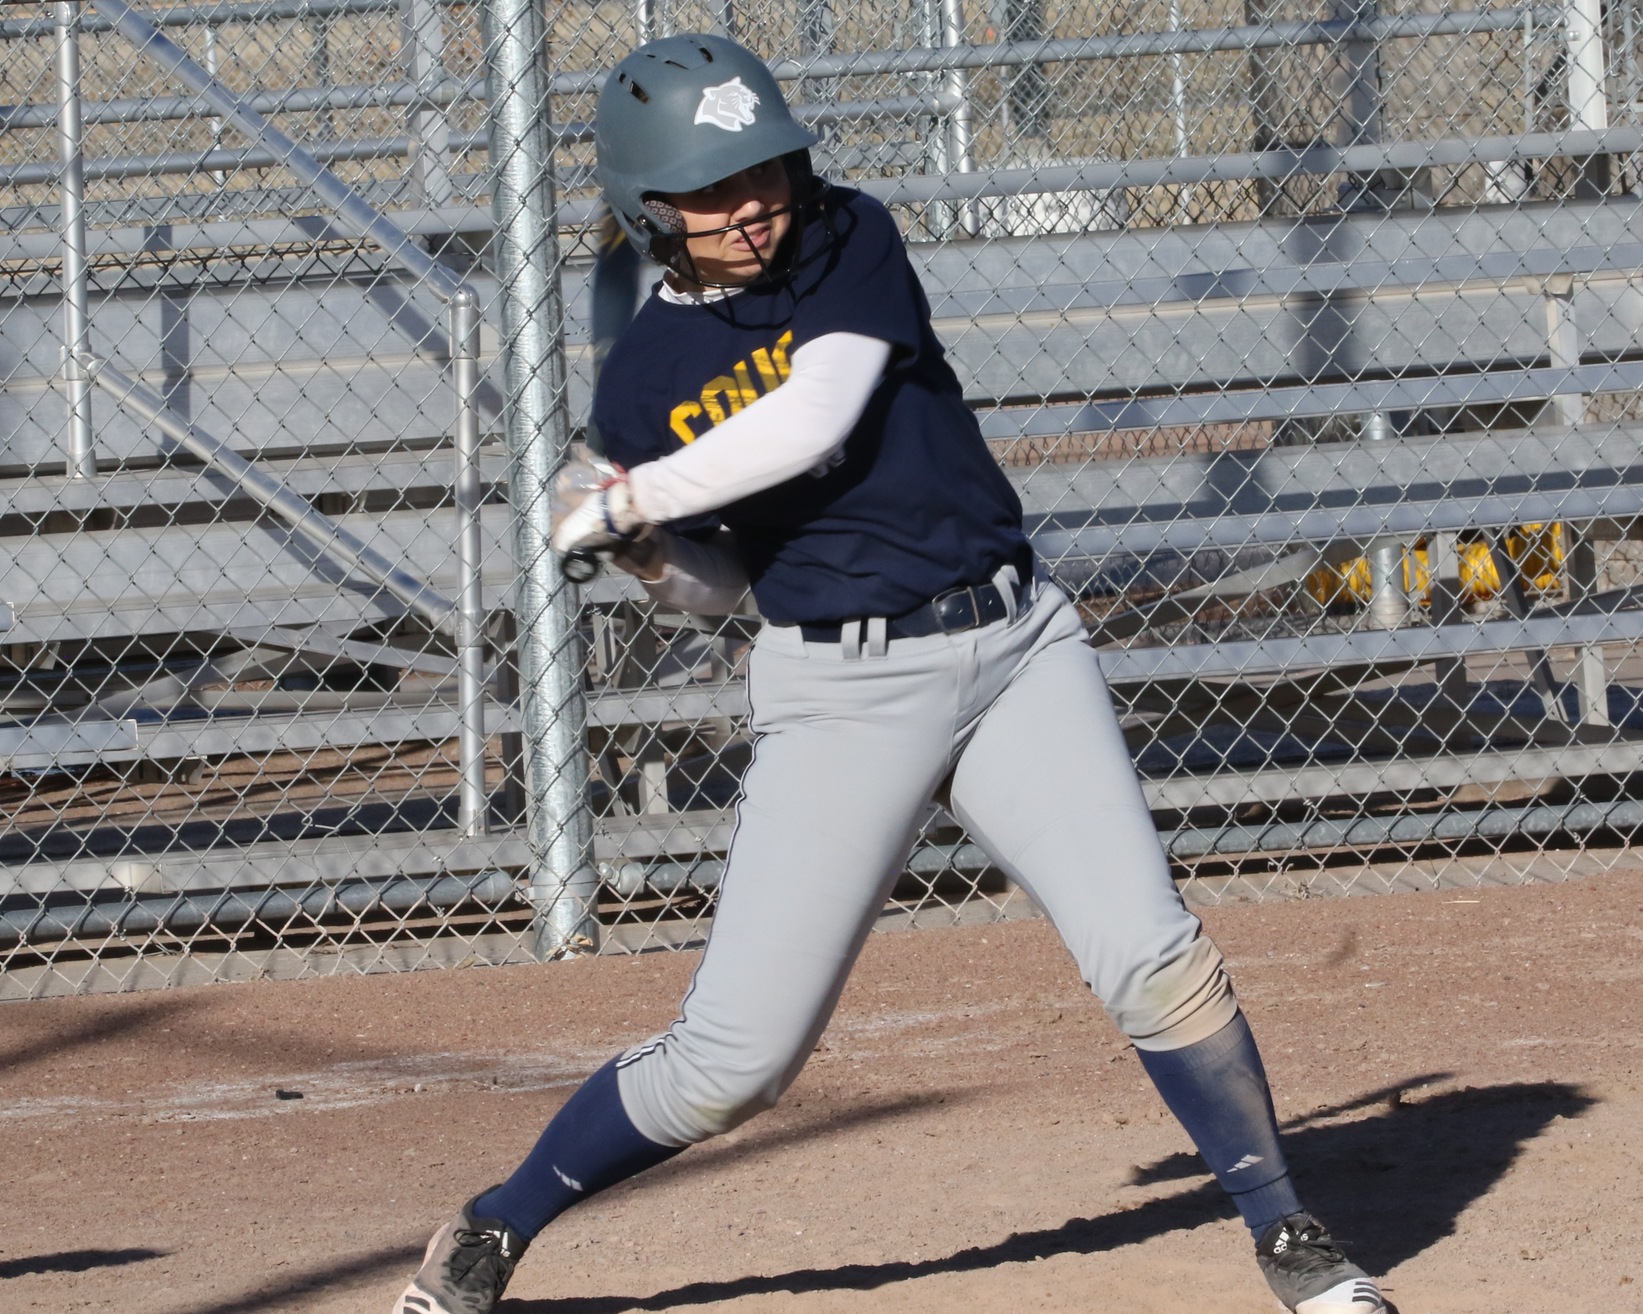 WNCC softball drops games to Odessa